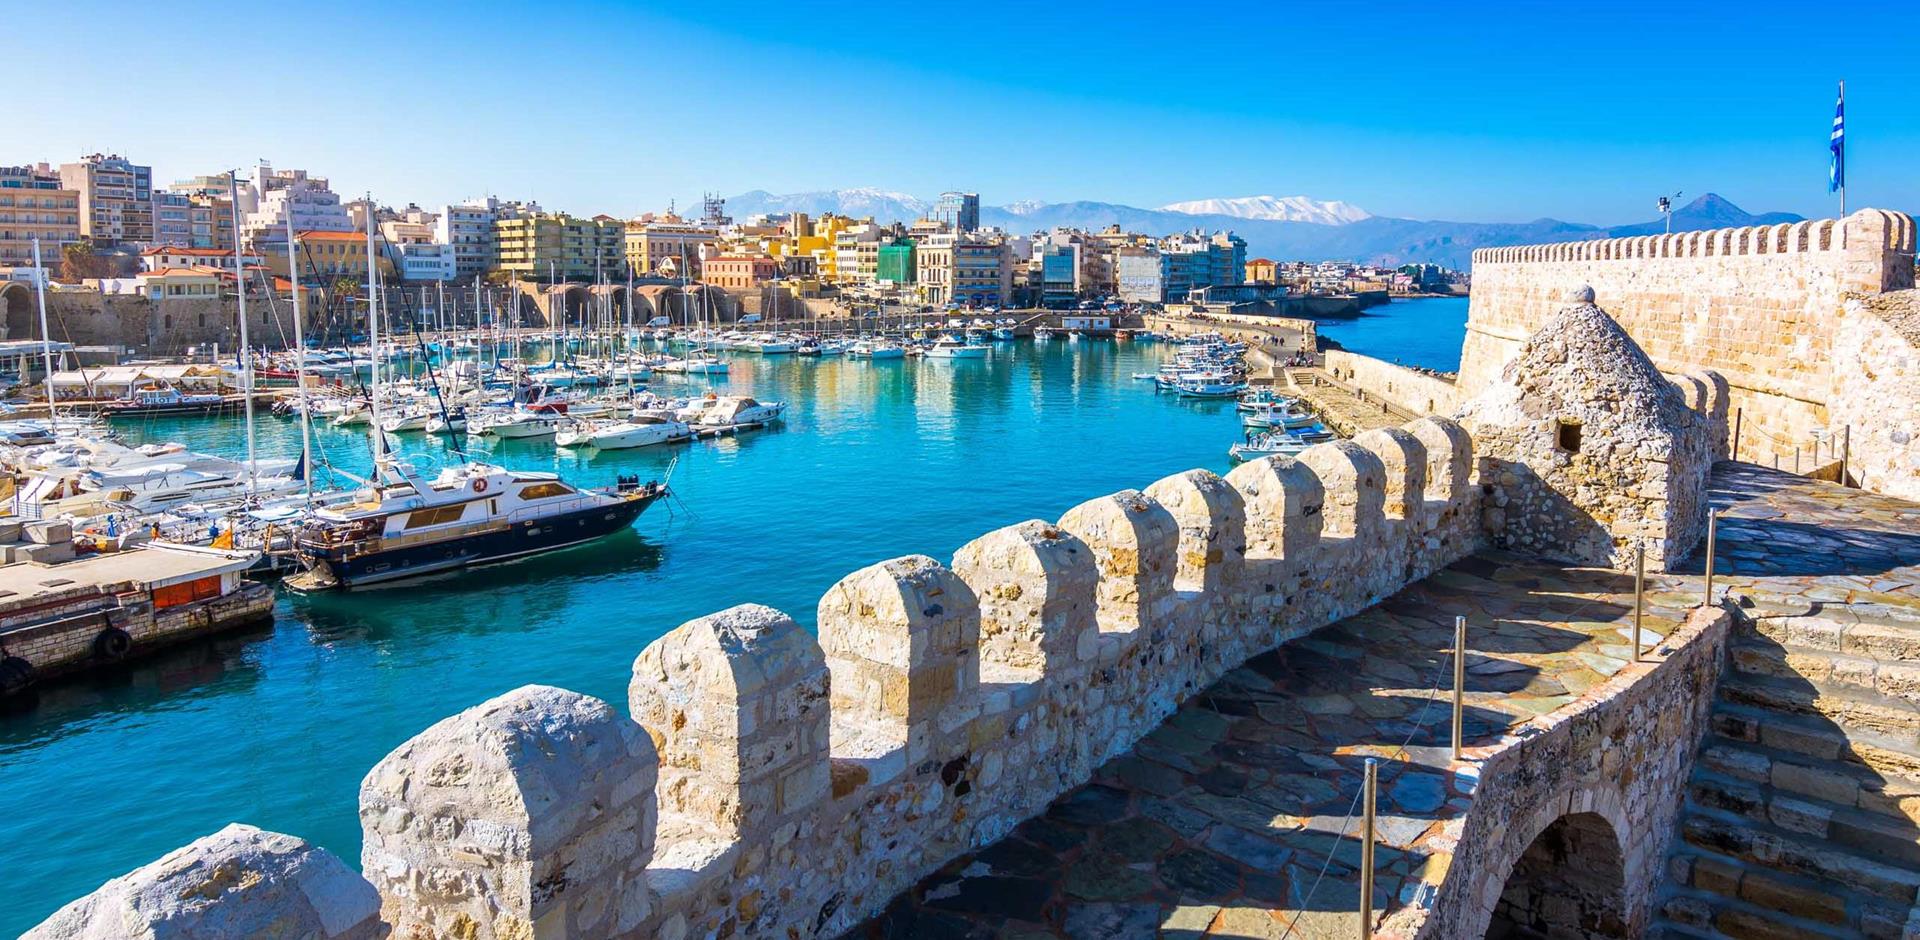 Heraklion harbour with old venetian fort Koule and shipyards